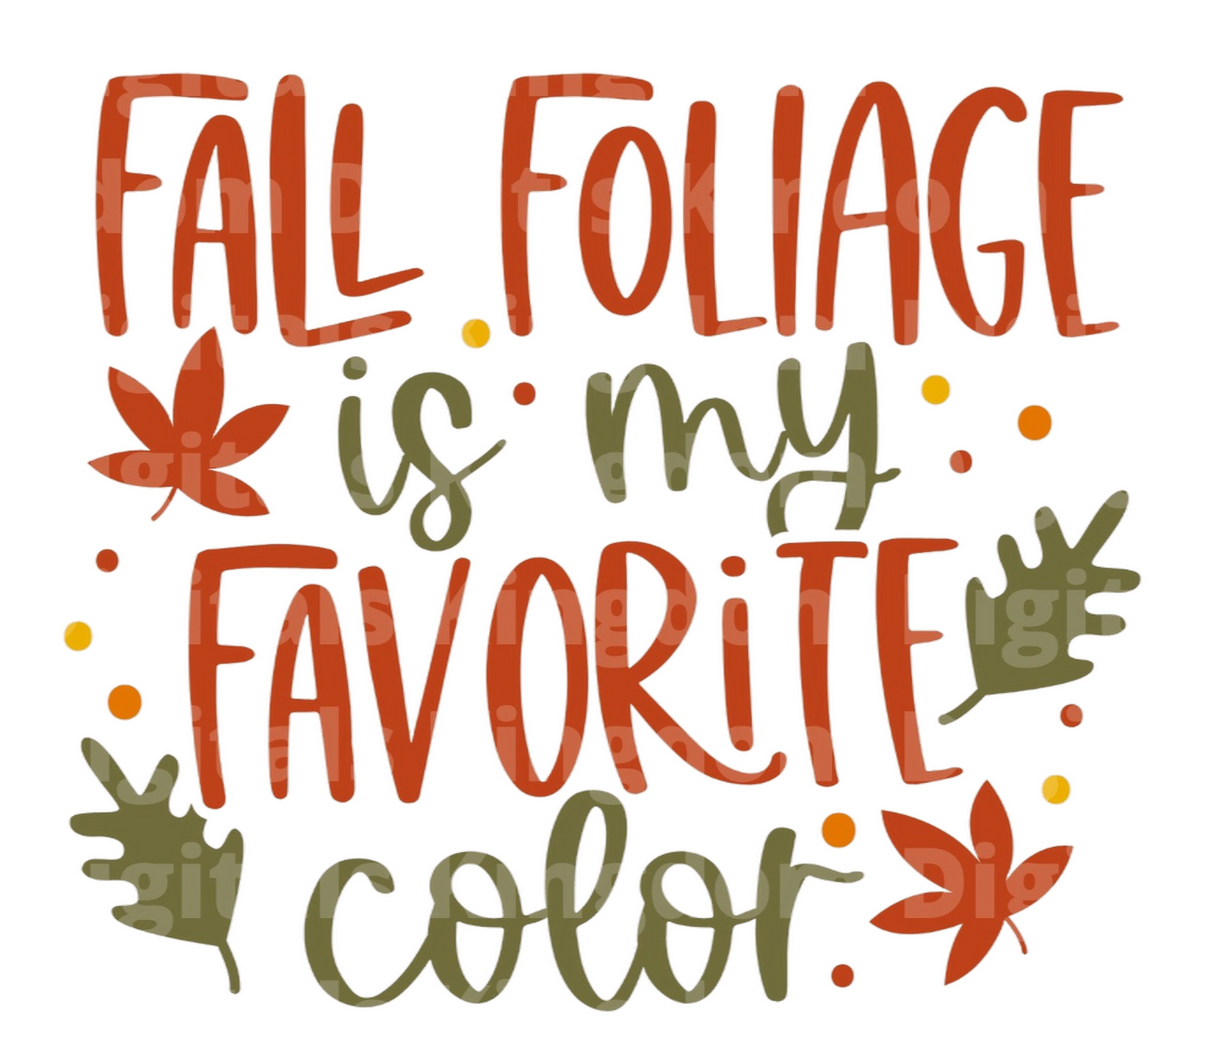 Fall foliage is my favorite color SVG Cut File